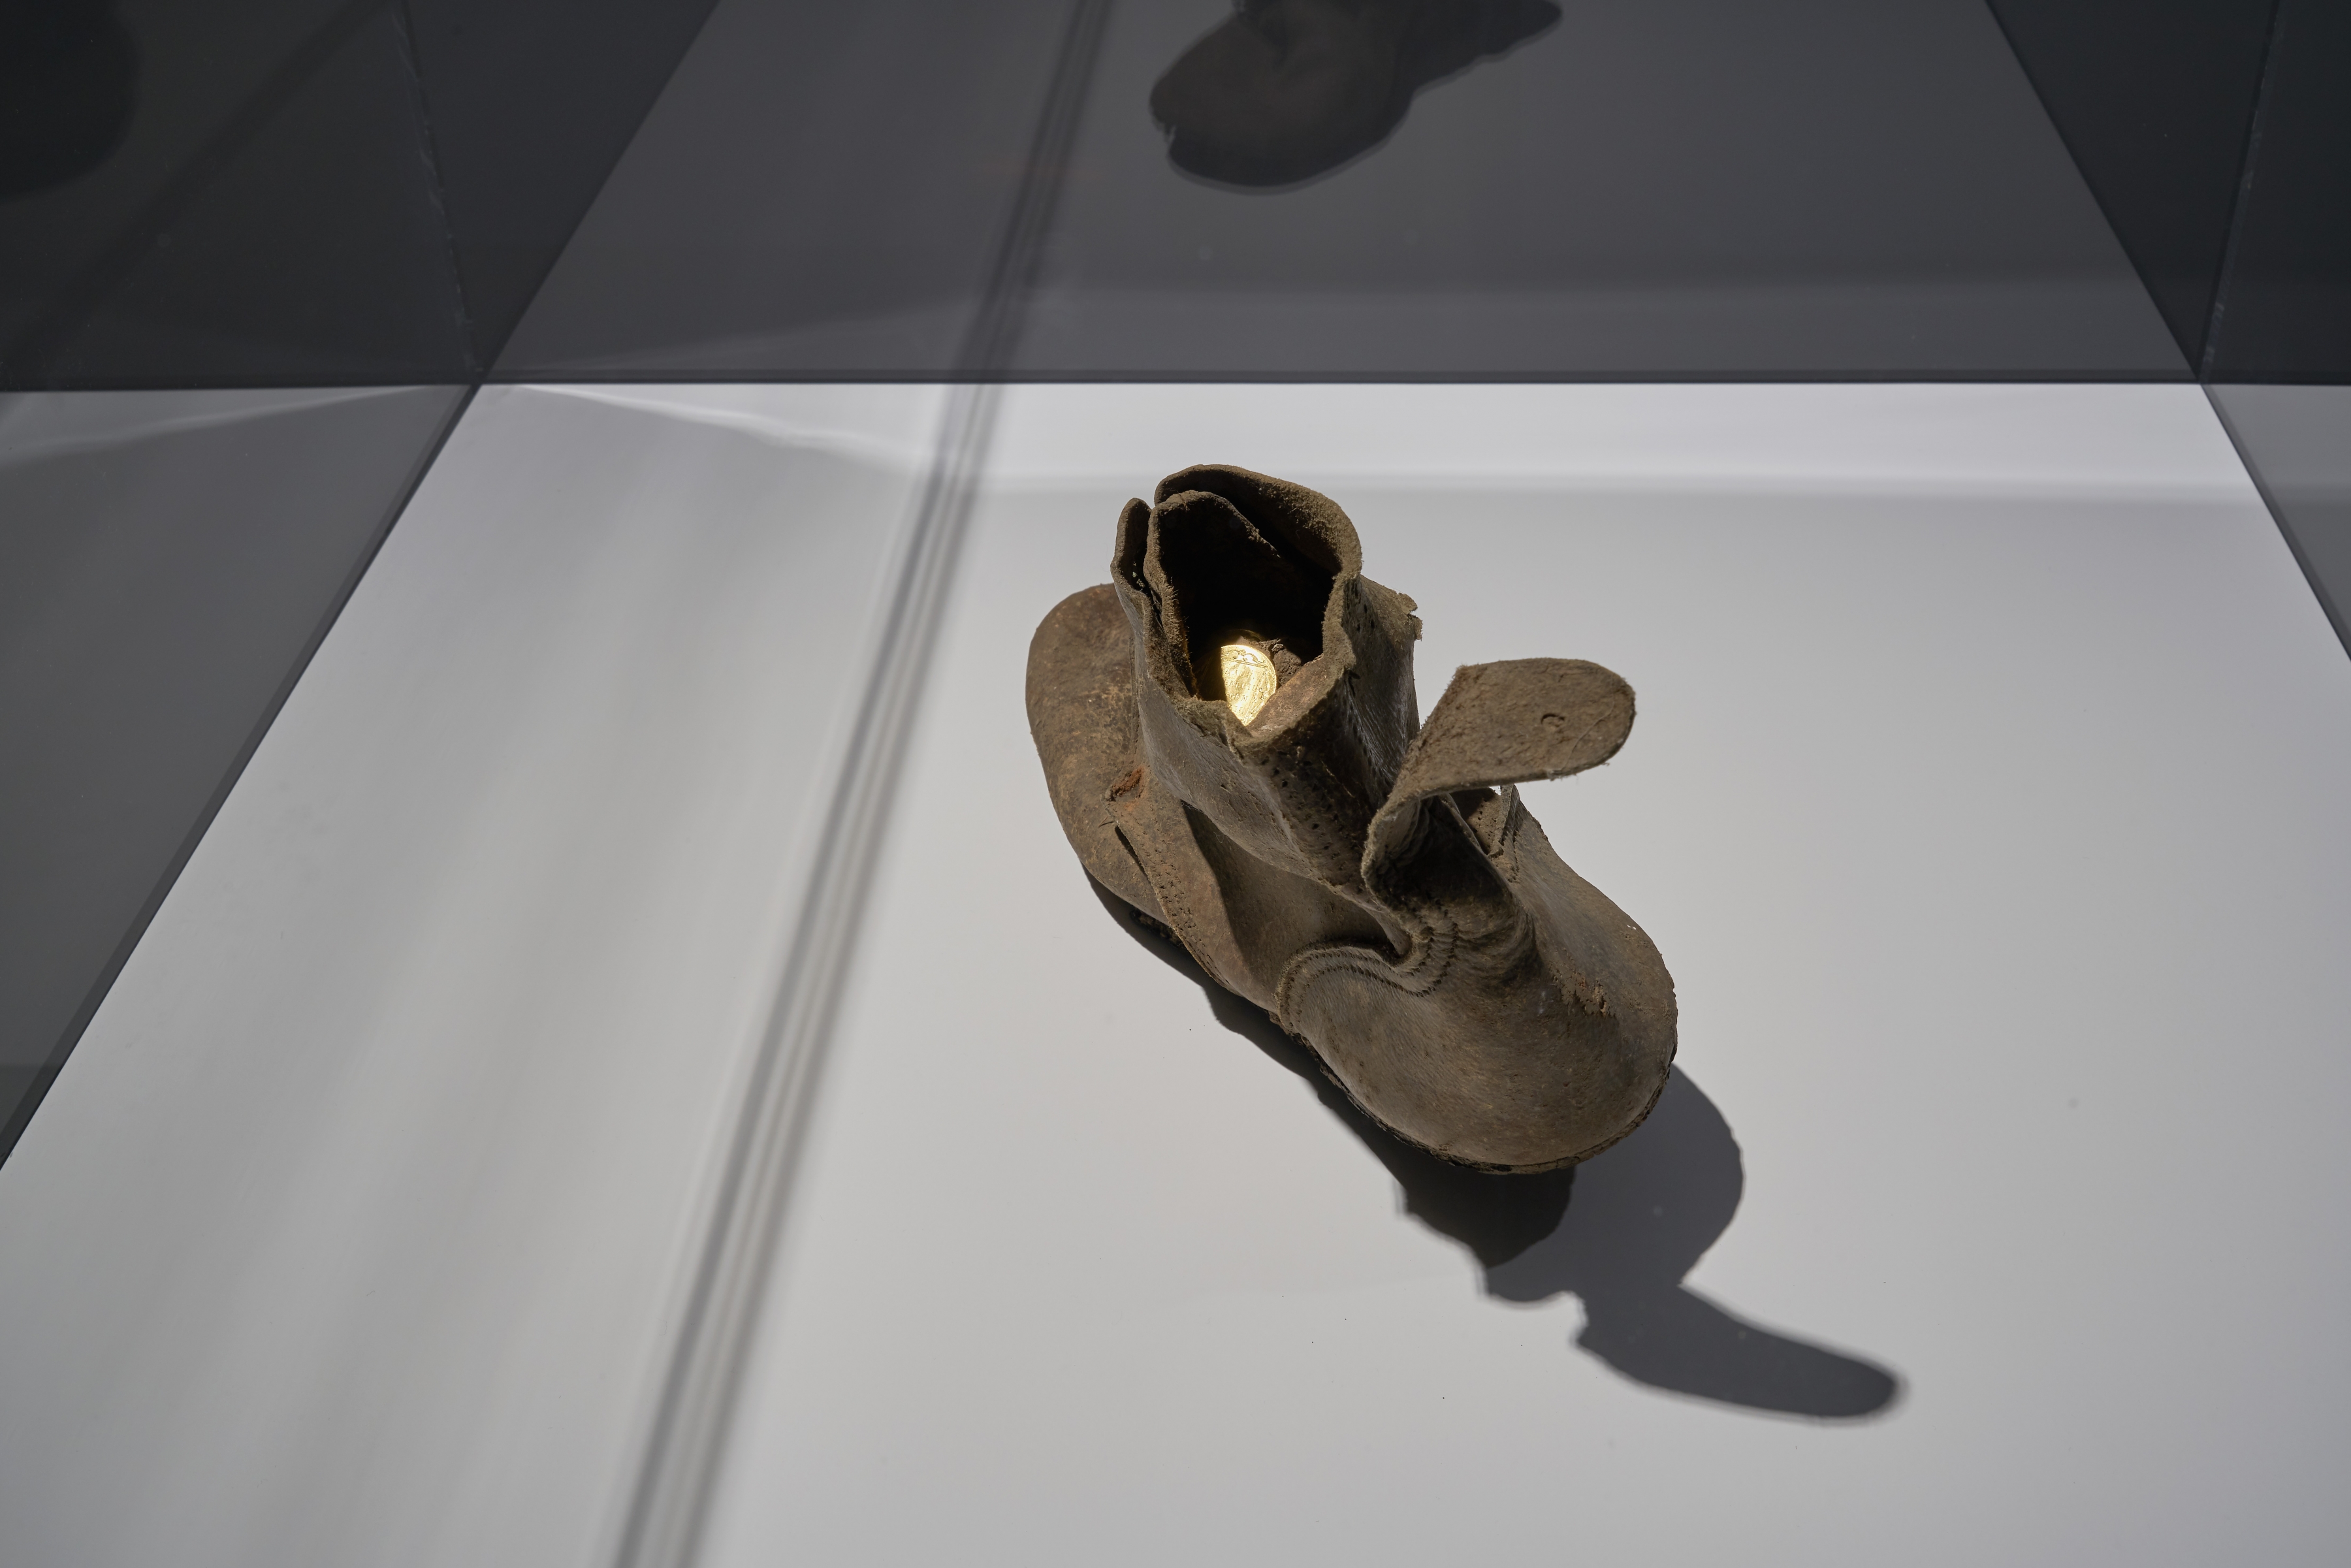 Wanderer II, 2011

shoe, golden coin

&nbsp;

&nbsp;

I placed a gold coin in this shoe of a dead soldier, which he can use to pay Charon to ferry him across the Styx.